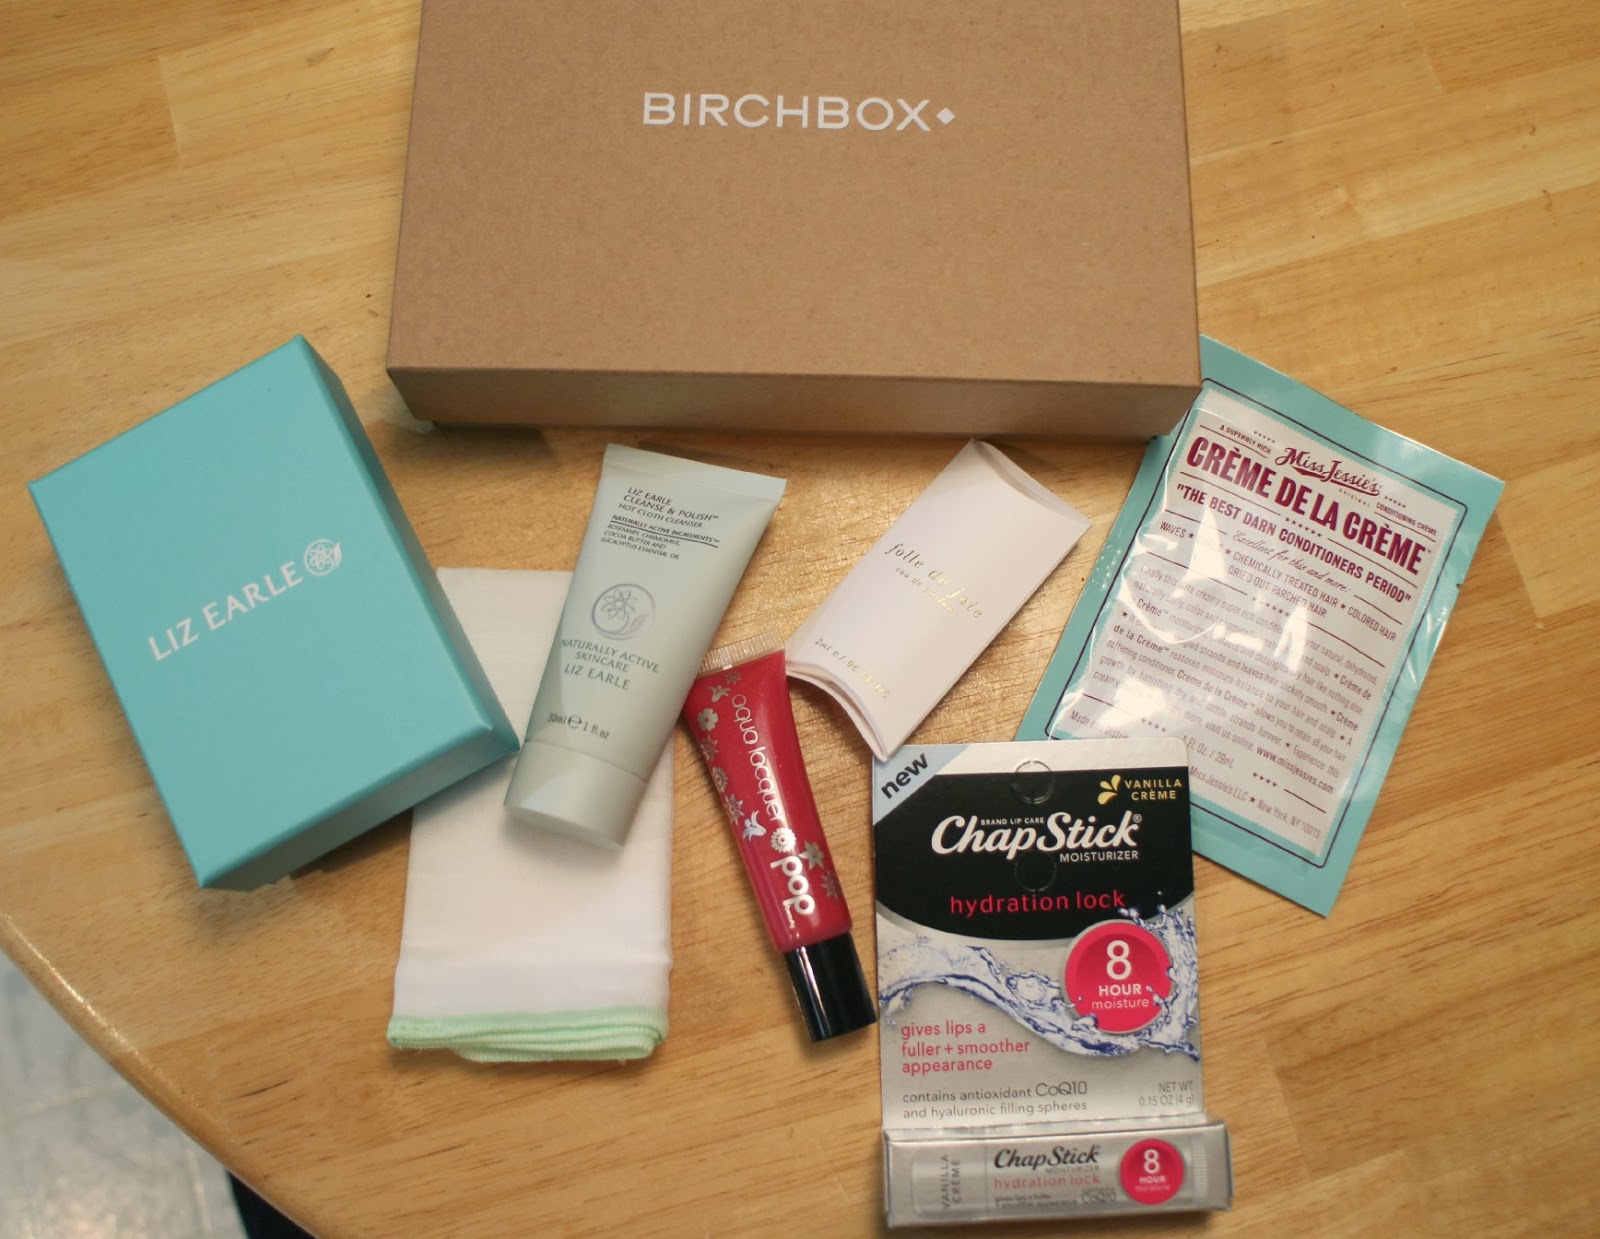 Tickled Pink in the Rain: October39;s Edition What is in her Birchbox?